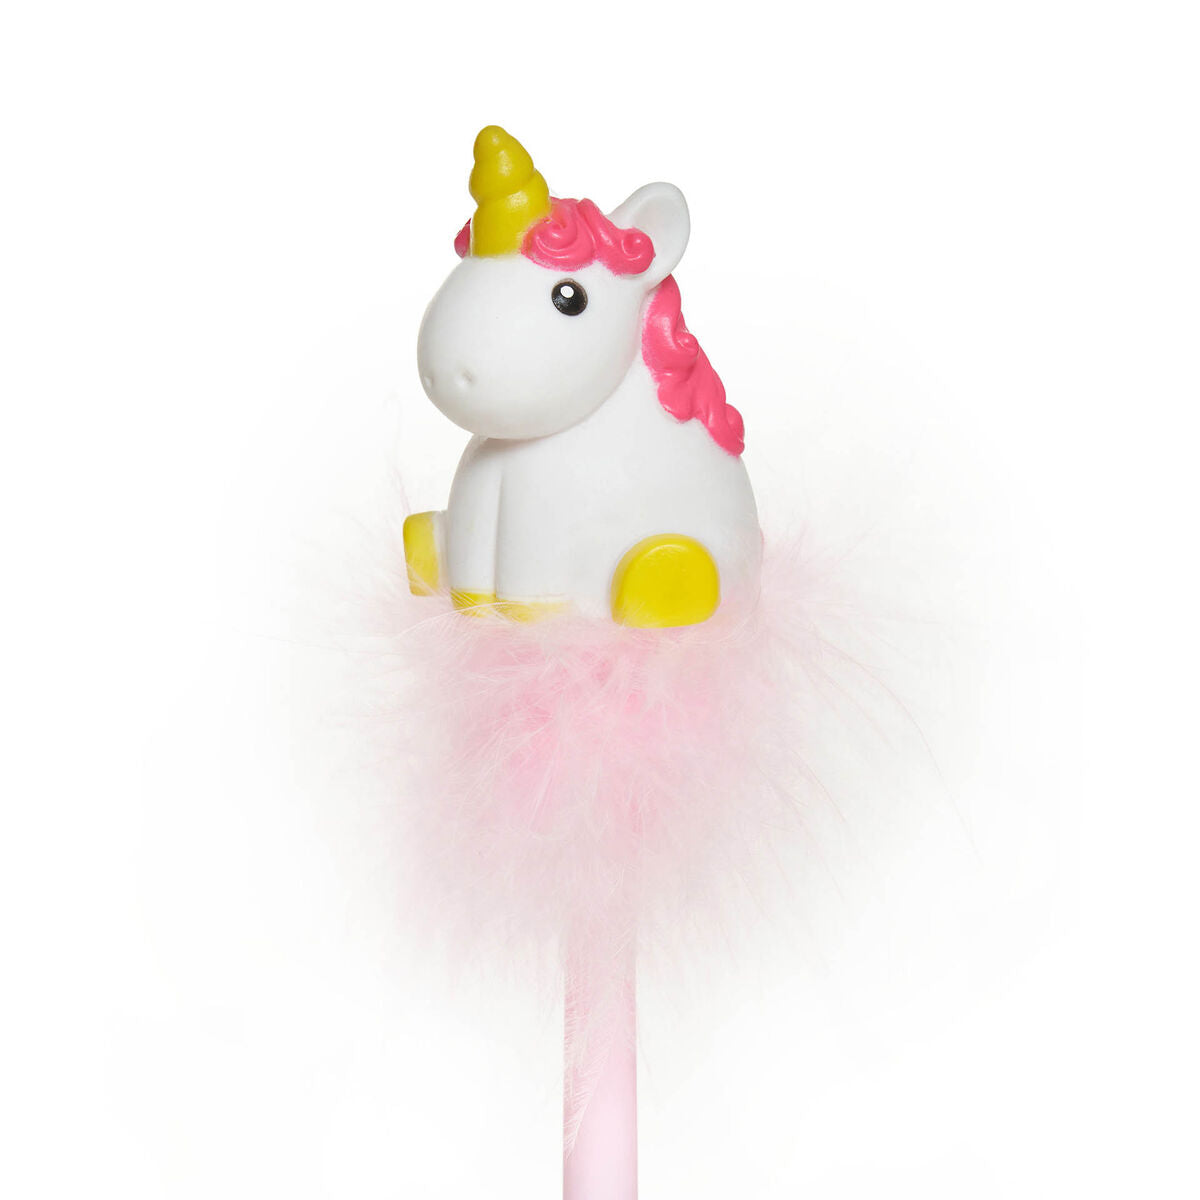 Back to School | Legami Ballpoint Pen With Light - Unicorn by Weirs of Baggot St